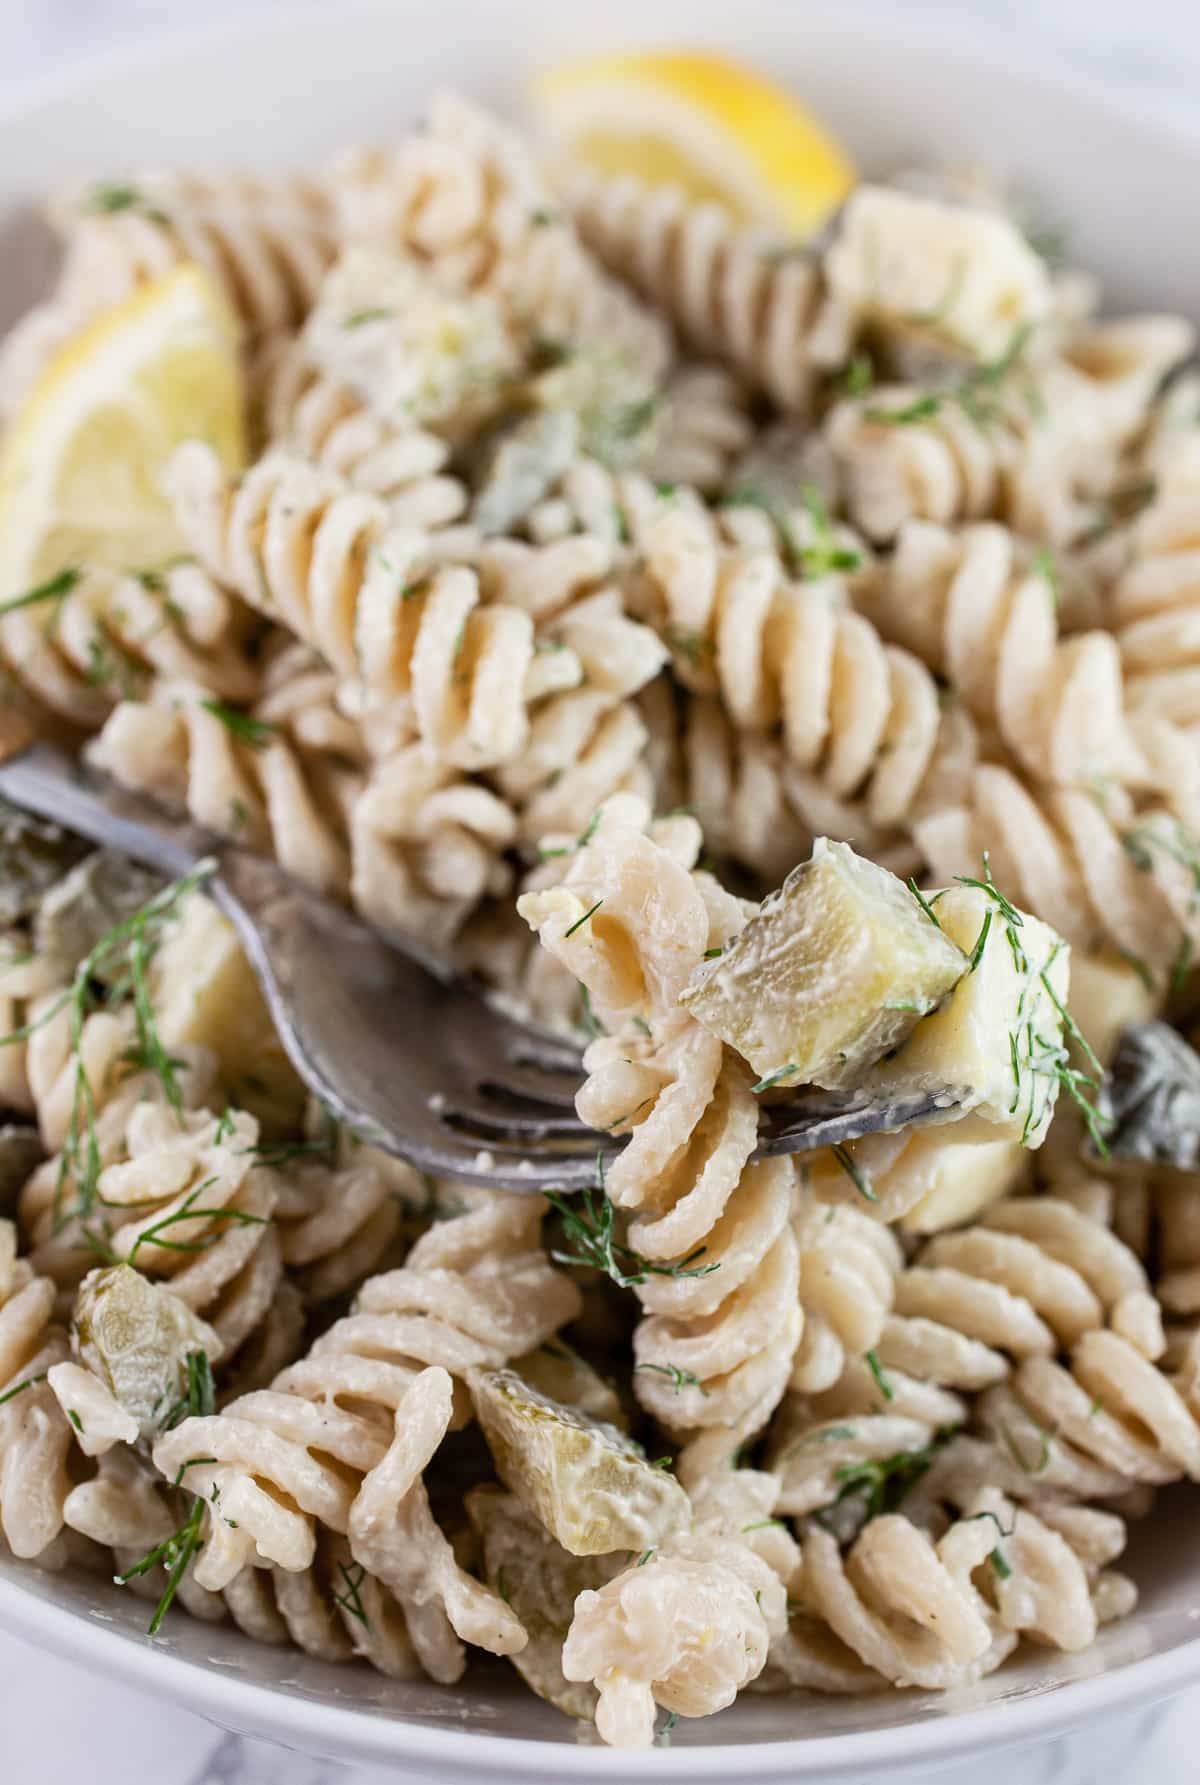 Dill pickle pasta salad in white bowl with fork and lemon wedge.